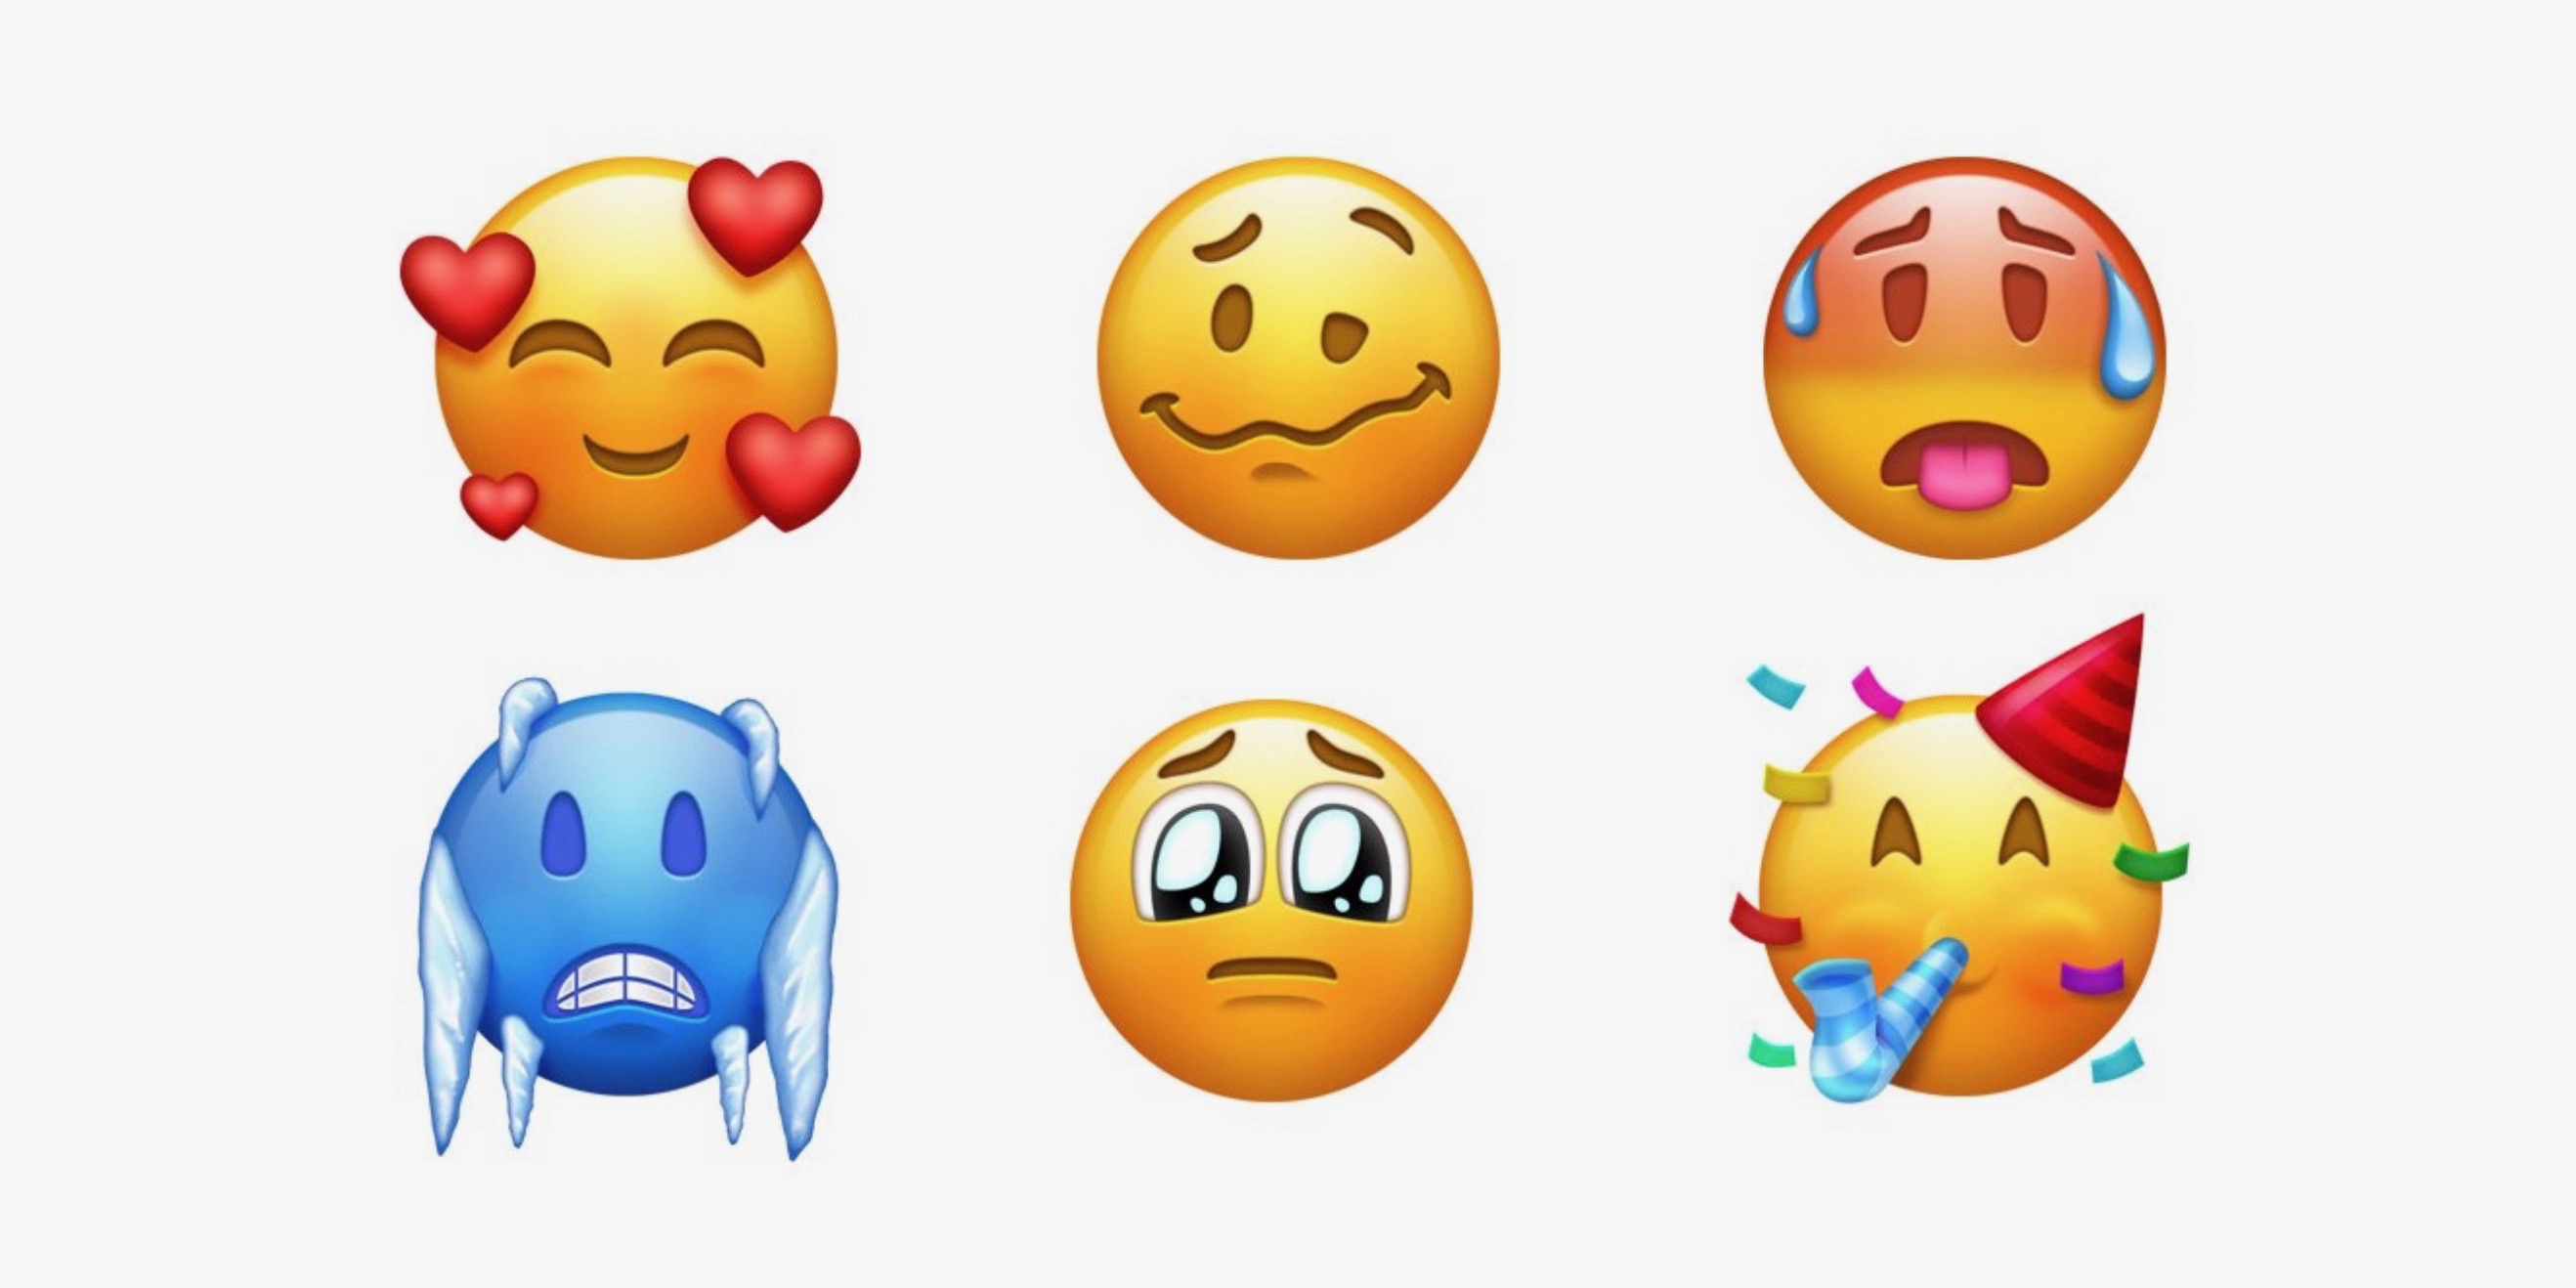 Here are the 100+ new emoji arriving on iPhone and iPad this year [Video] 9to5Mac